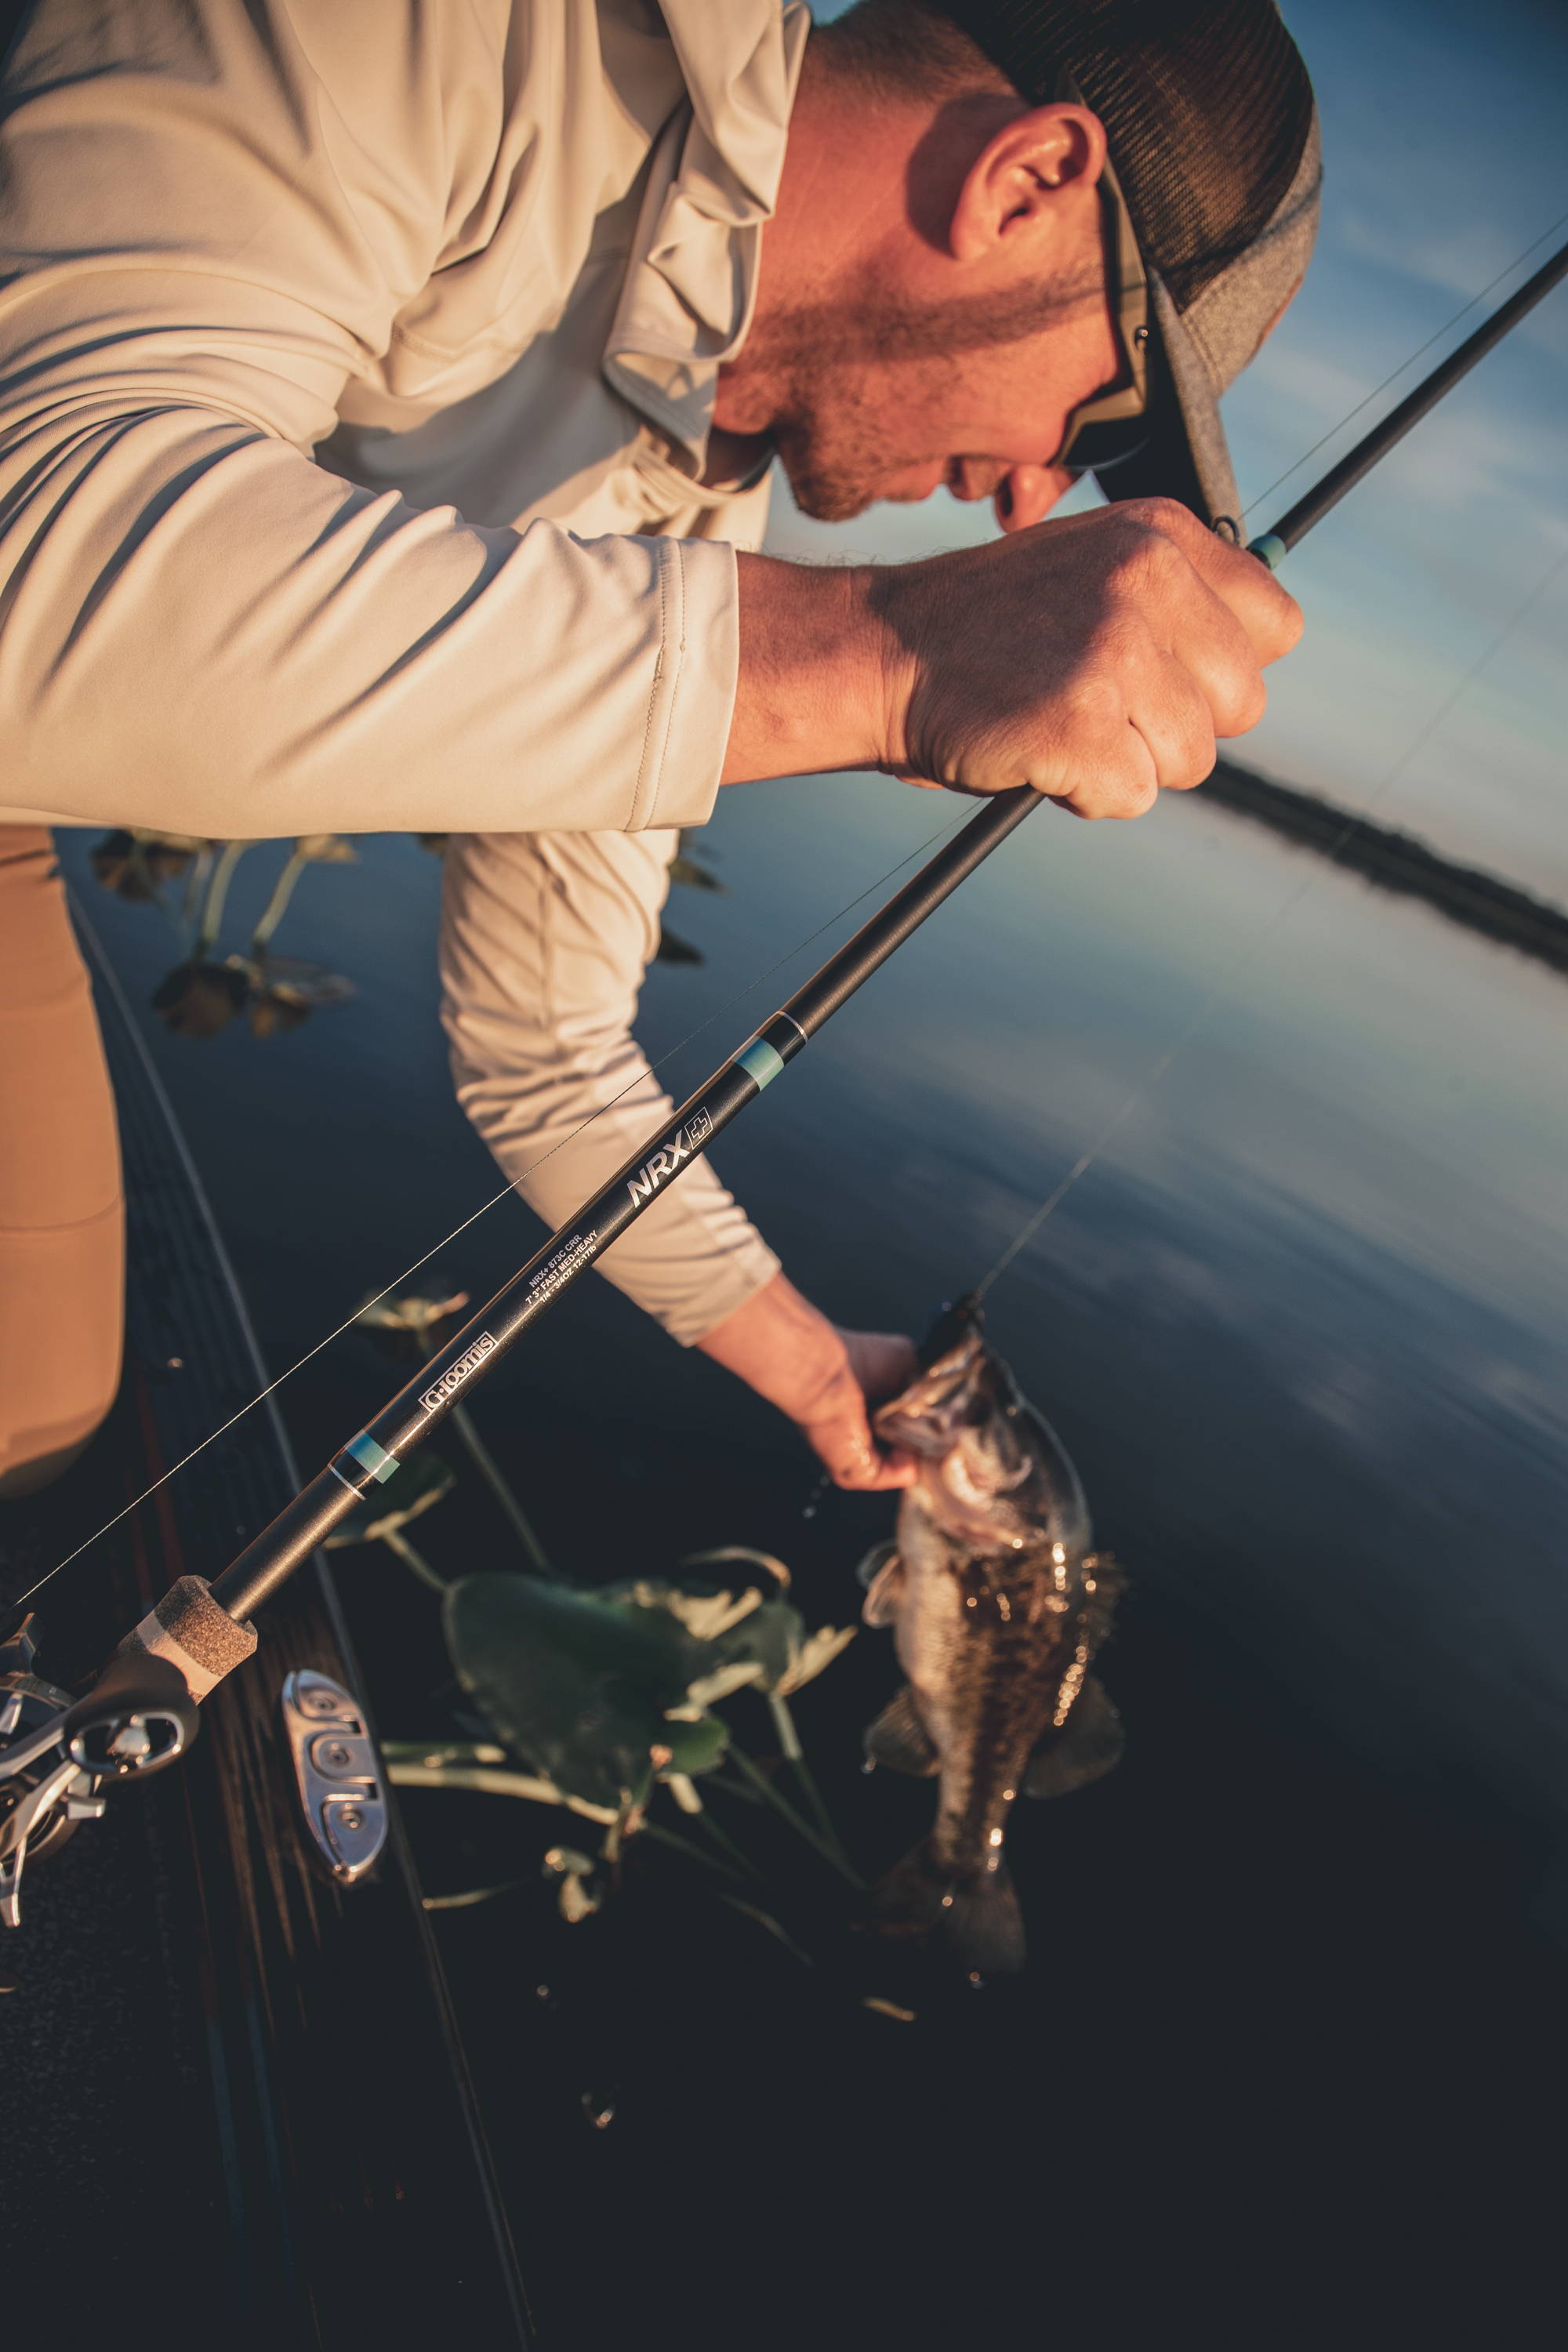 The New G. Loomis NRX+ Series of Bass Rods: Premium Tools for